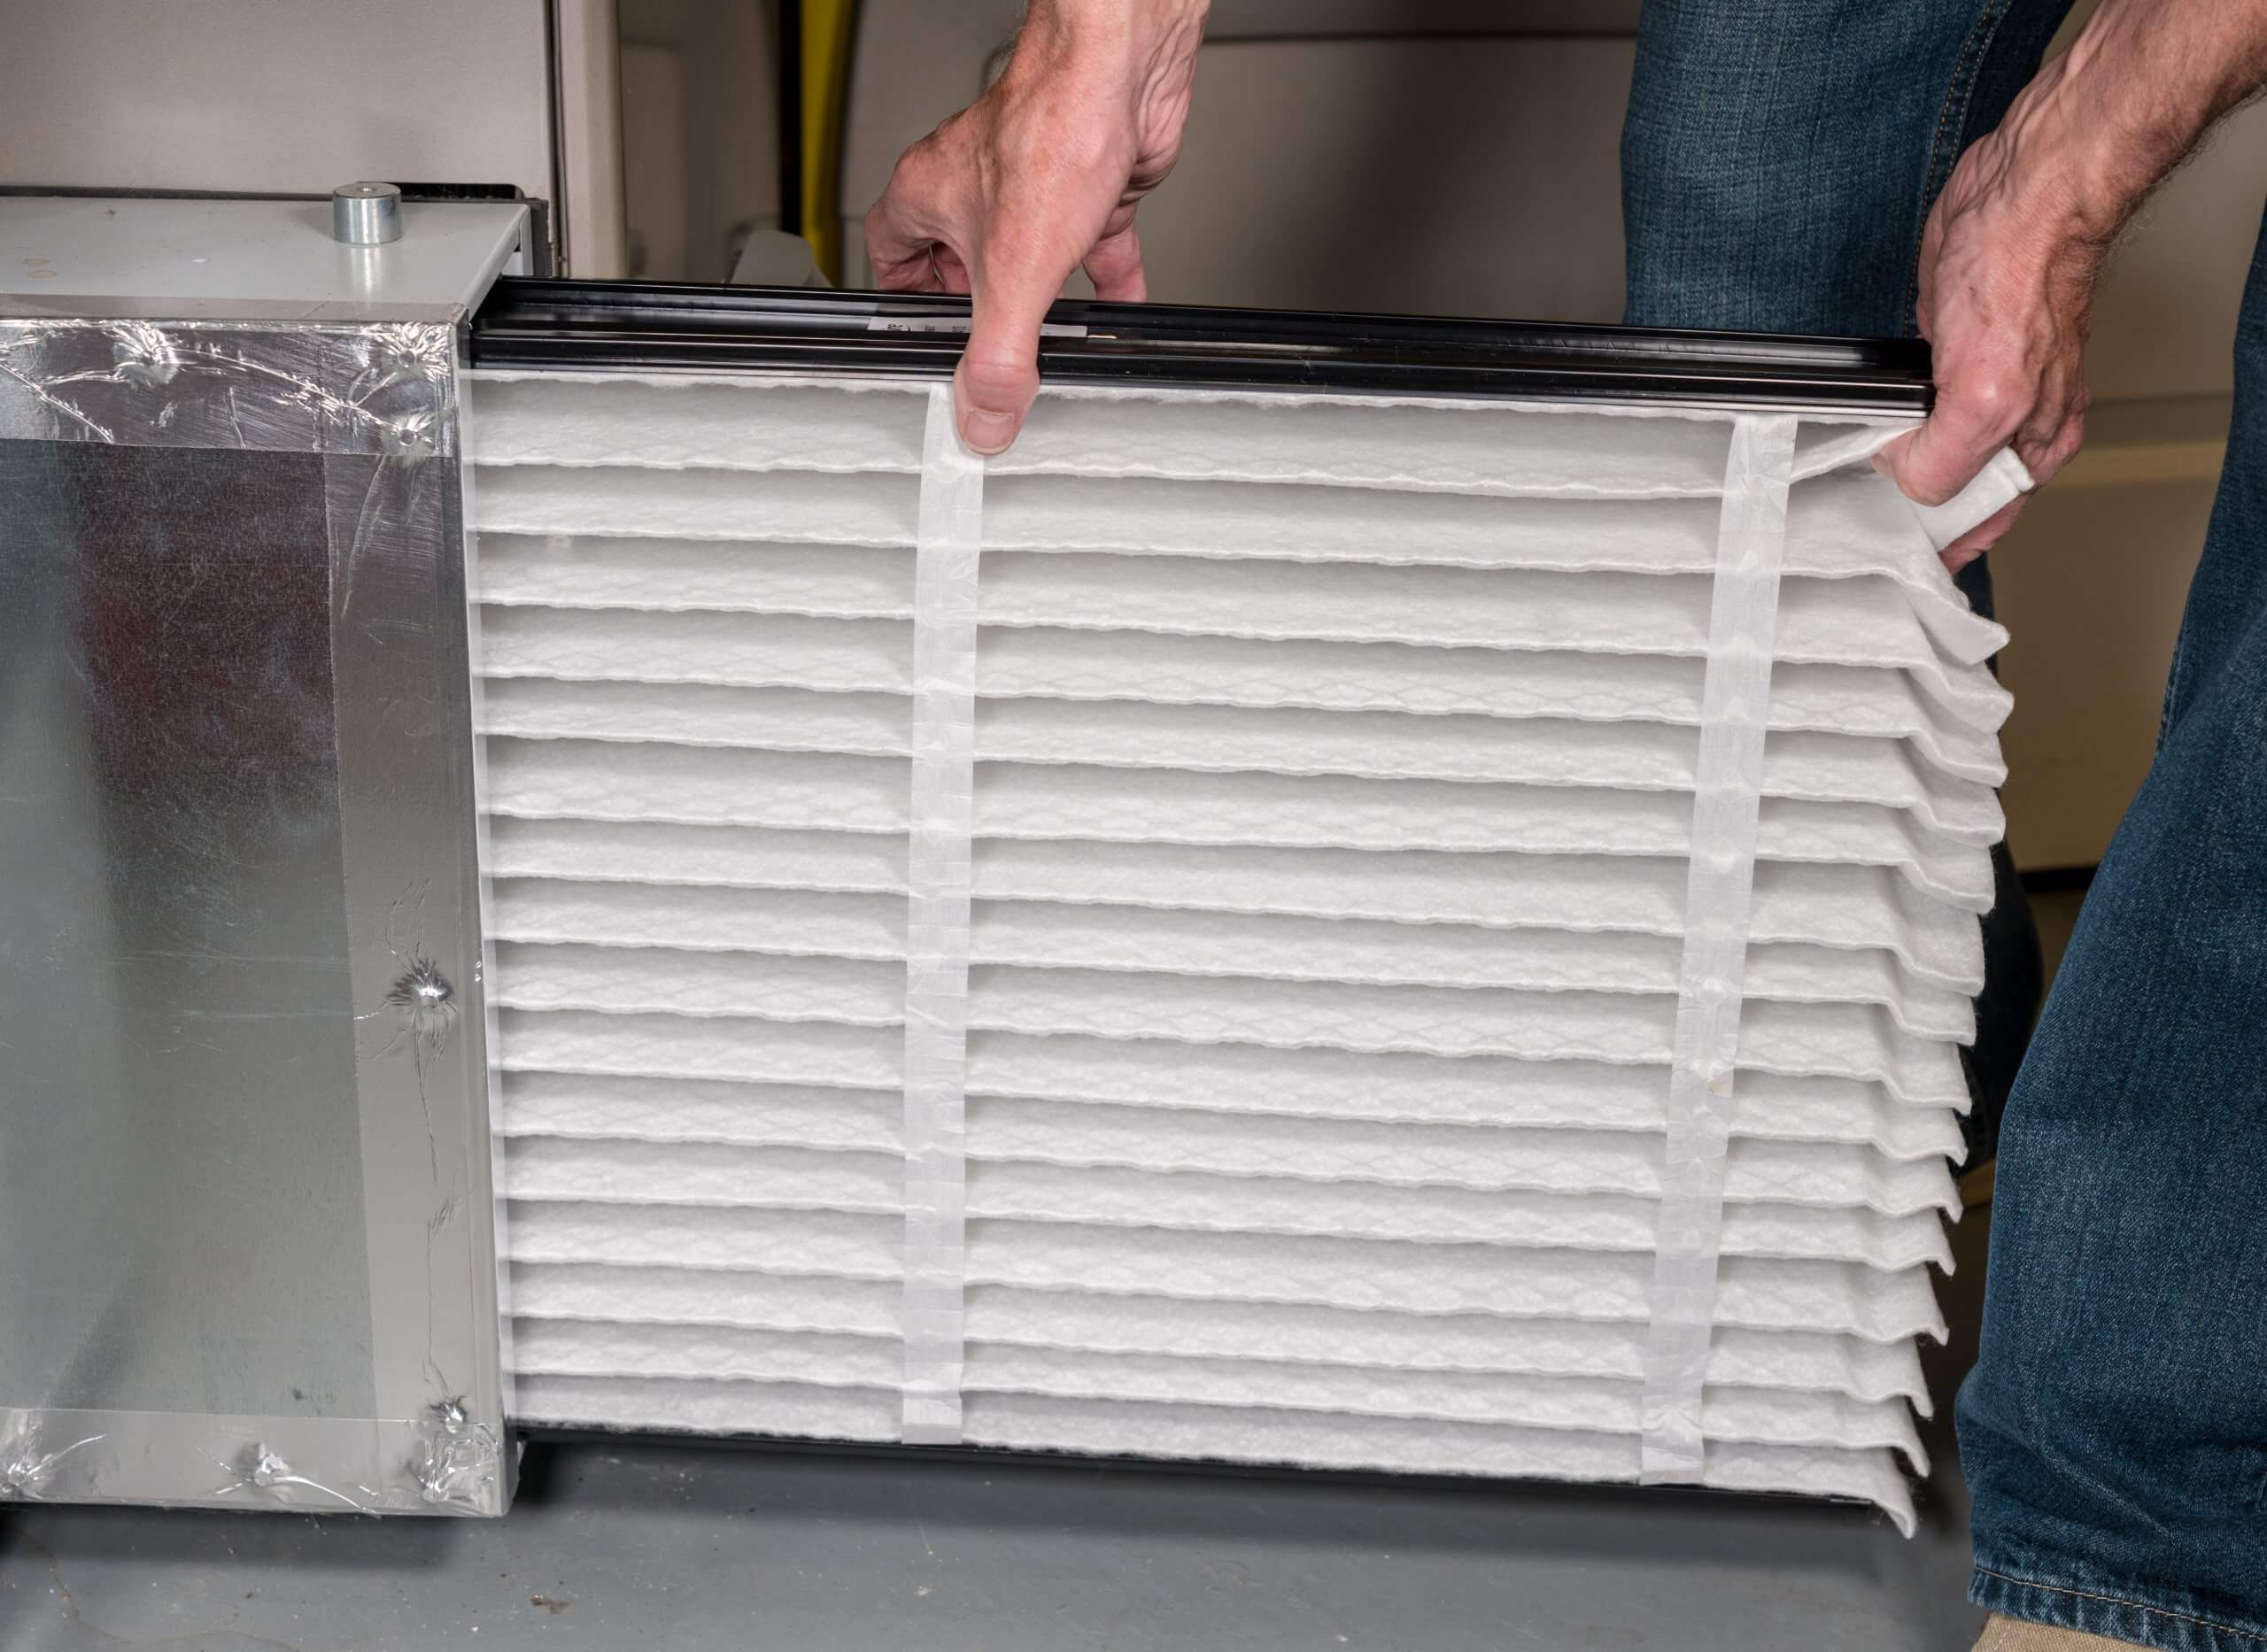 Maintaining Clean Air In Your Home: The Recommended Frequency For Changing Your Air Filter